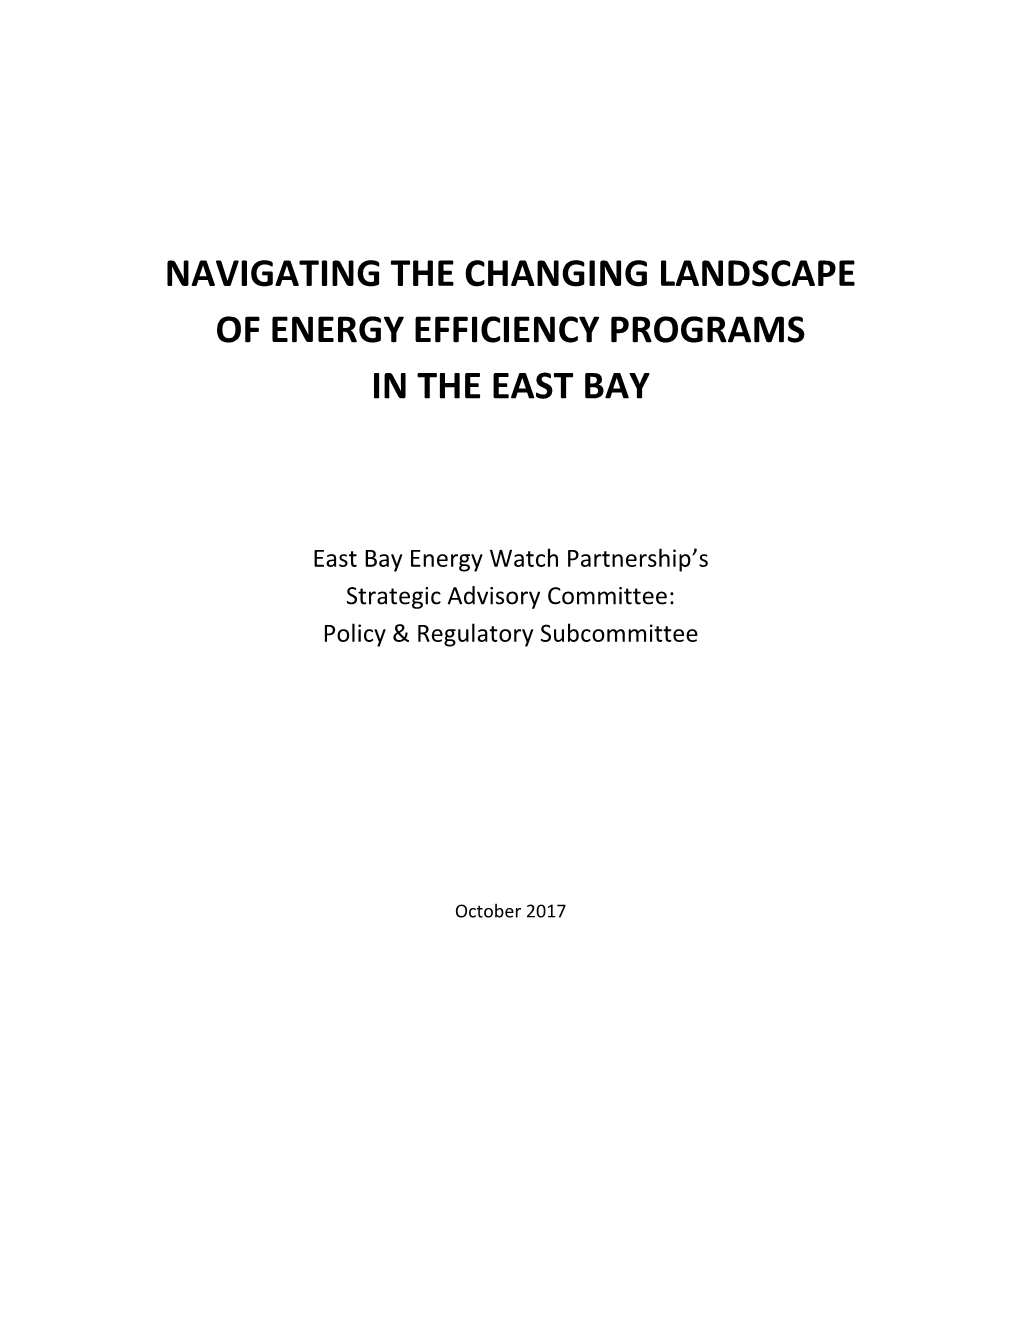 Navigating the Changing Landscape of Energy Efficiency Programs in the East Bay